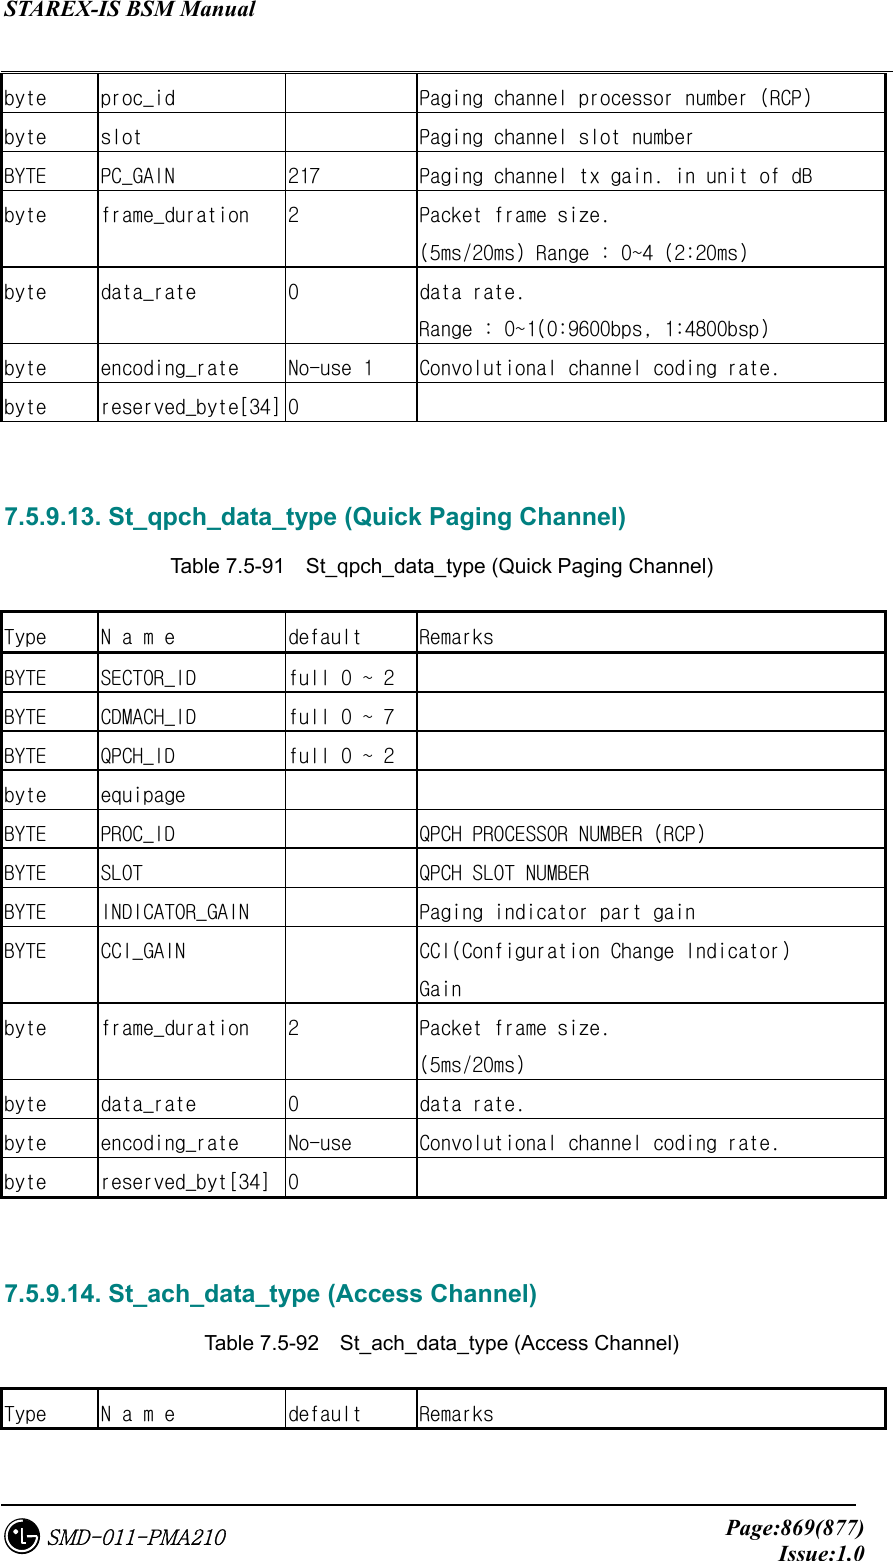 STAREX-IS BSM Manual     Page:869(877)Issue:1.0SMD-011-PMA210 byte  proc_id    Paging channel processor number (RCP) byte  slot    Paging channel slot number BYTE  PC_GAIN  217  Paging channel tx gain. in unit of dB byte  frame_duration  2  Packet frame size. (5ms/20ms) Range : 0~4 (2:20ms) byte  data_rate  0  data rate. Range : 0~1(0:9600bps, 1:4800bsp) byte  encoding_rate  No-use 1  Convolutional channel coding rate. byte  reserved_byte[34] 0     7.5.9.13. St_qpch_data_type (Quick Paging Channel) Table 7.5-91  St_qpch_data_type (Quick Paging Channel) Type  N a m e  default   Remarks  BYTE  SECTOR_ID  full 0 ~ 2   BYTE  CDMACH_ID  full 0 ~ 7   BYTE  QPCH_ID  full 0 ~ 2   byte   equipage     BYTE  PROC_ID    QPCH PROCESSOR NUMBER (RCP) BYTE  SLOT    QPCH SLOT NUMBER BYTE  INDICATOR_GAIN    Paging indicator part gain BYTE  CCI_GAIN    CCI(Configuration Change Indicator) Gain byte  frame_duration  2  Packet frame size. (5ms/20ms) byte  data_rate  0  data rate. byte  encoding_rate  No-use  Convolutional channel coding rate. byte  reserved_byt[34]  0     7.5.9.14. St_ach_data_type (Access Channel) Table 7.5-92  St_ach_data_type (Access Channel) Type  N a m e  default  Remarks  